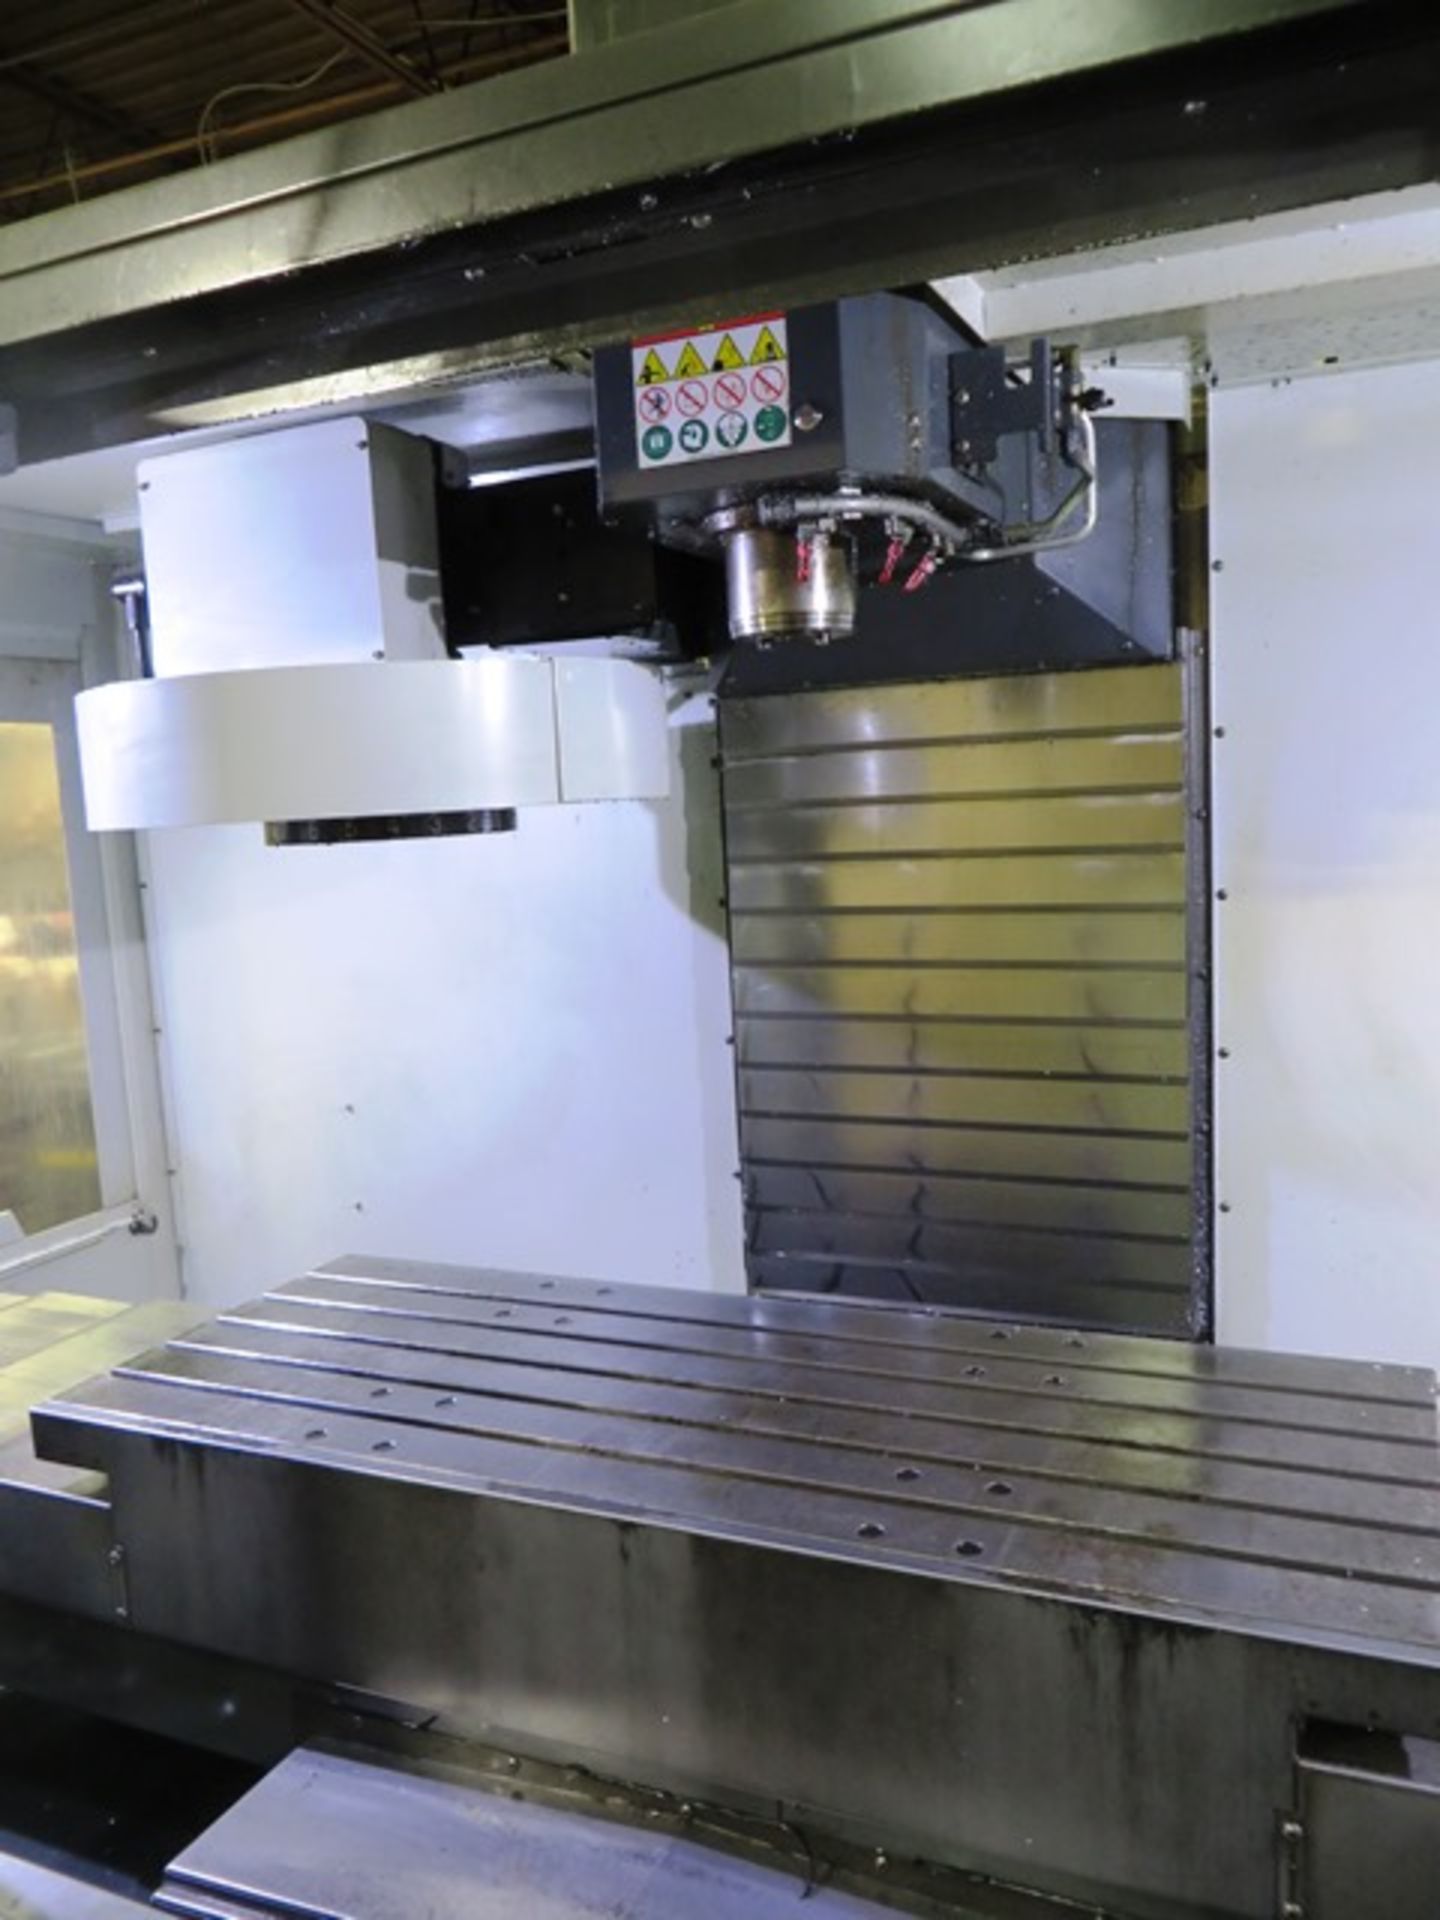 Haas VF-4 3-Axis CNC Vertical Machining Center - Image 5 of 6